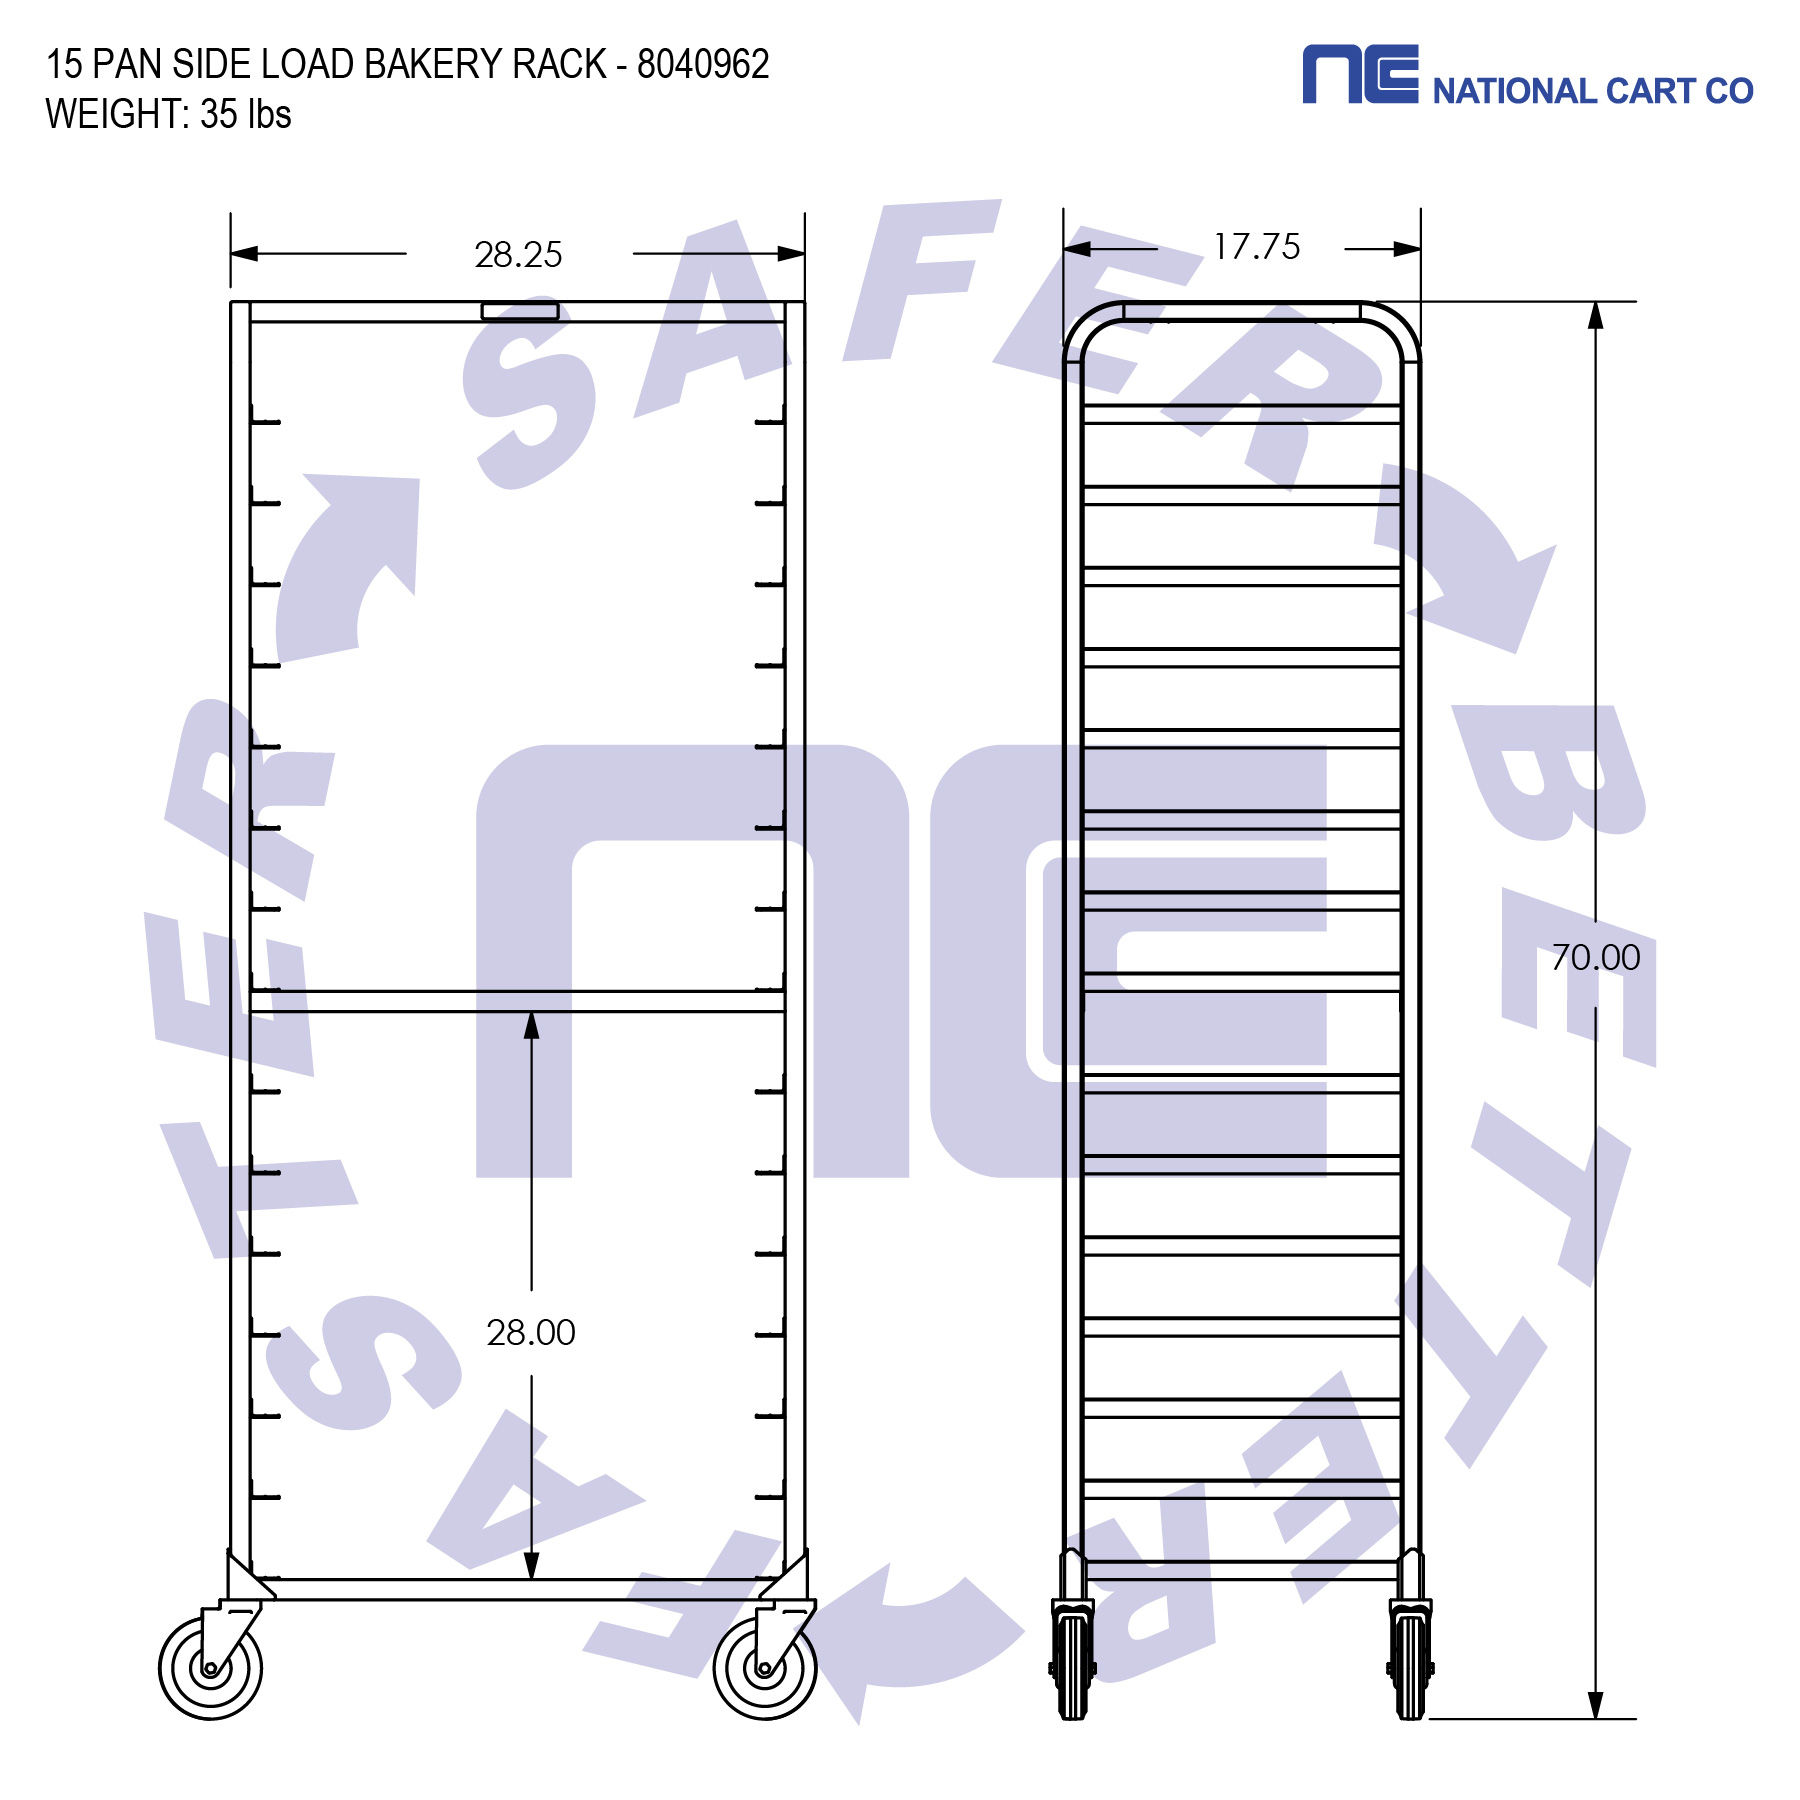 8040910 copy nest dollies industrial cart nesting picking cart NSF cart NSF rack NSF approved NSF certified National Sanitation Foundation tray shelf Distribution Cart picking cart tray shelf picking cart, picking cart, ecom cart, ecommerce cart, ecommerce picking cart, picking cart, INDUSTRIAL CARTS, grocery cart grocery picking cart, department store cart, beverage cart NSF approved. This food service cart meets strict standards and procedures imposed by NSF. lug cart meat department, produce department